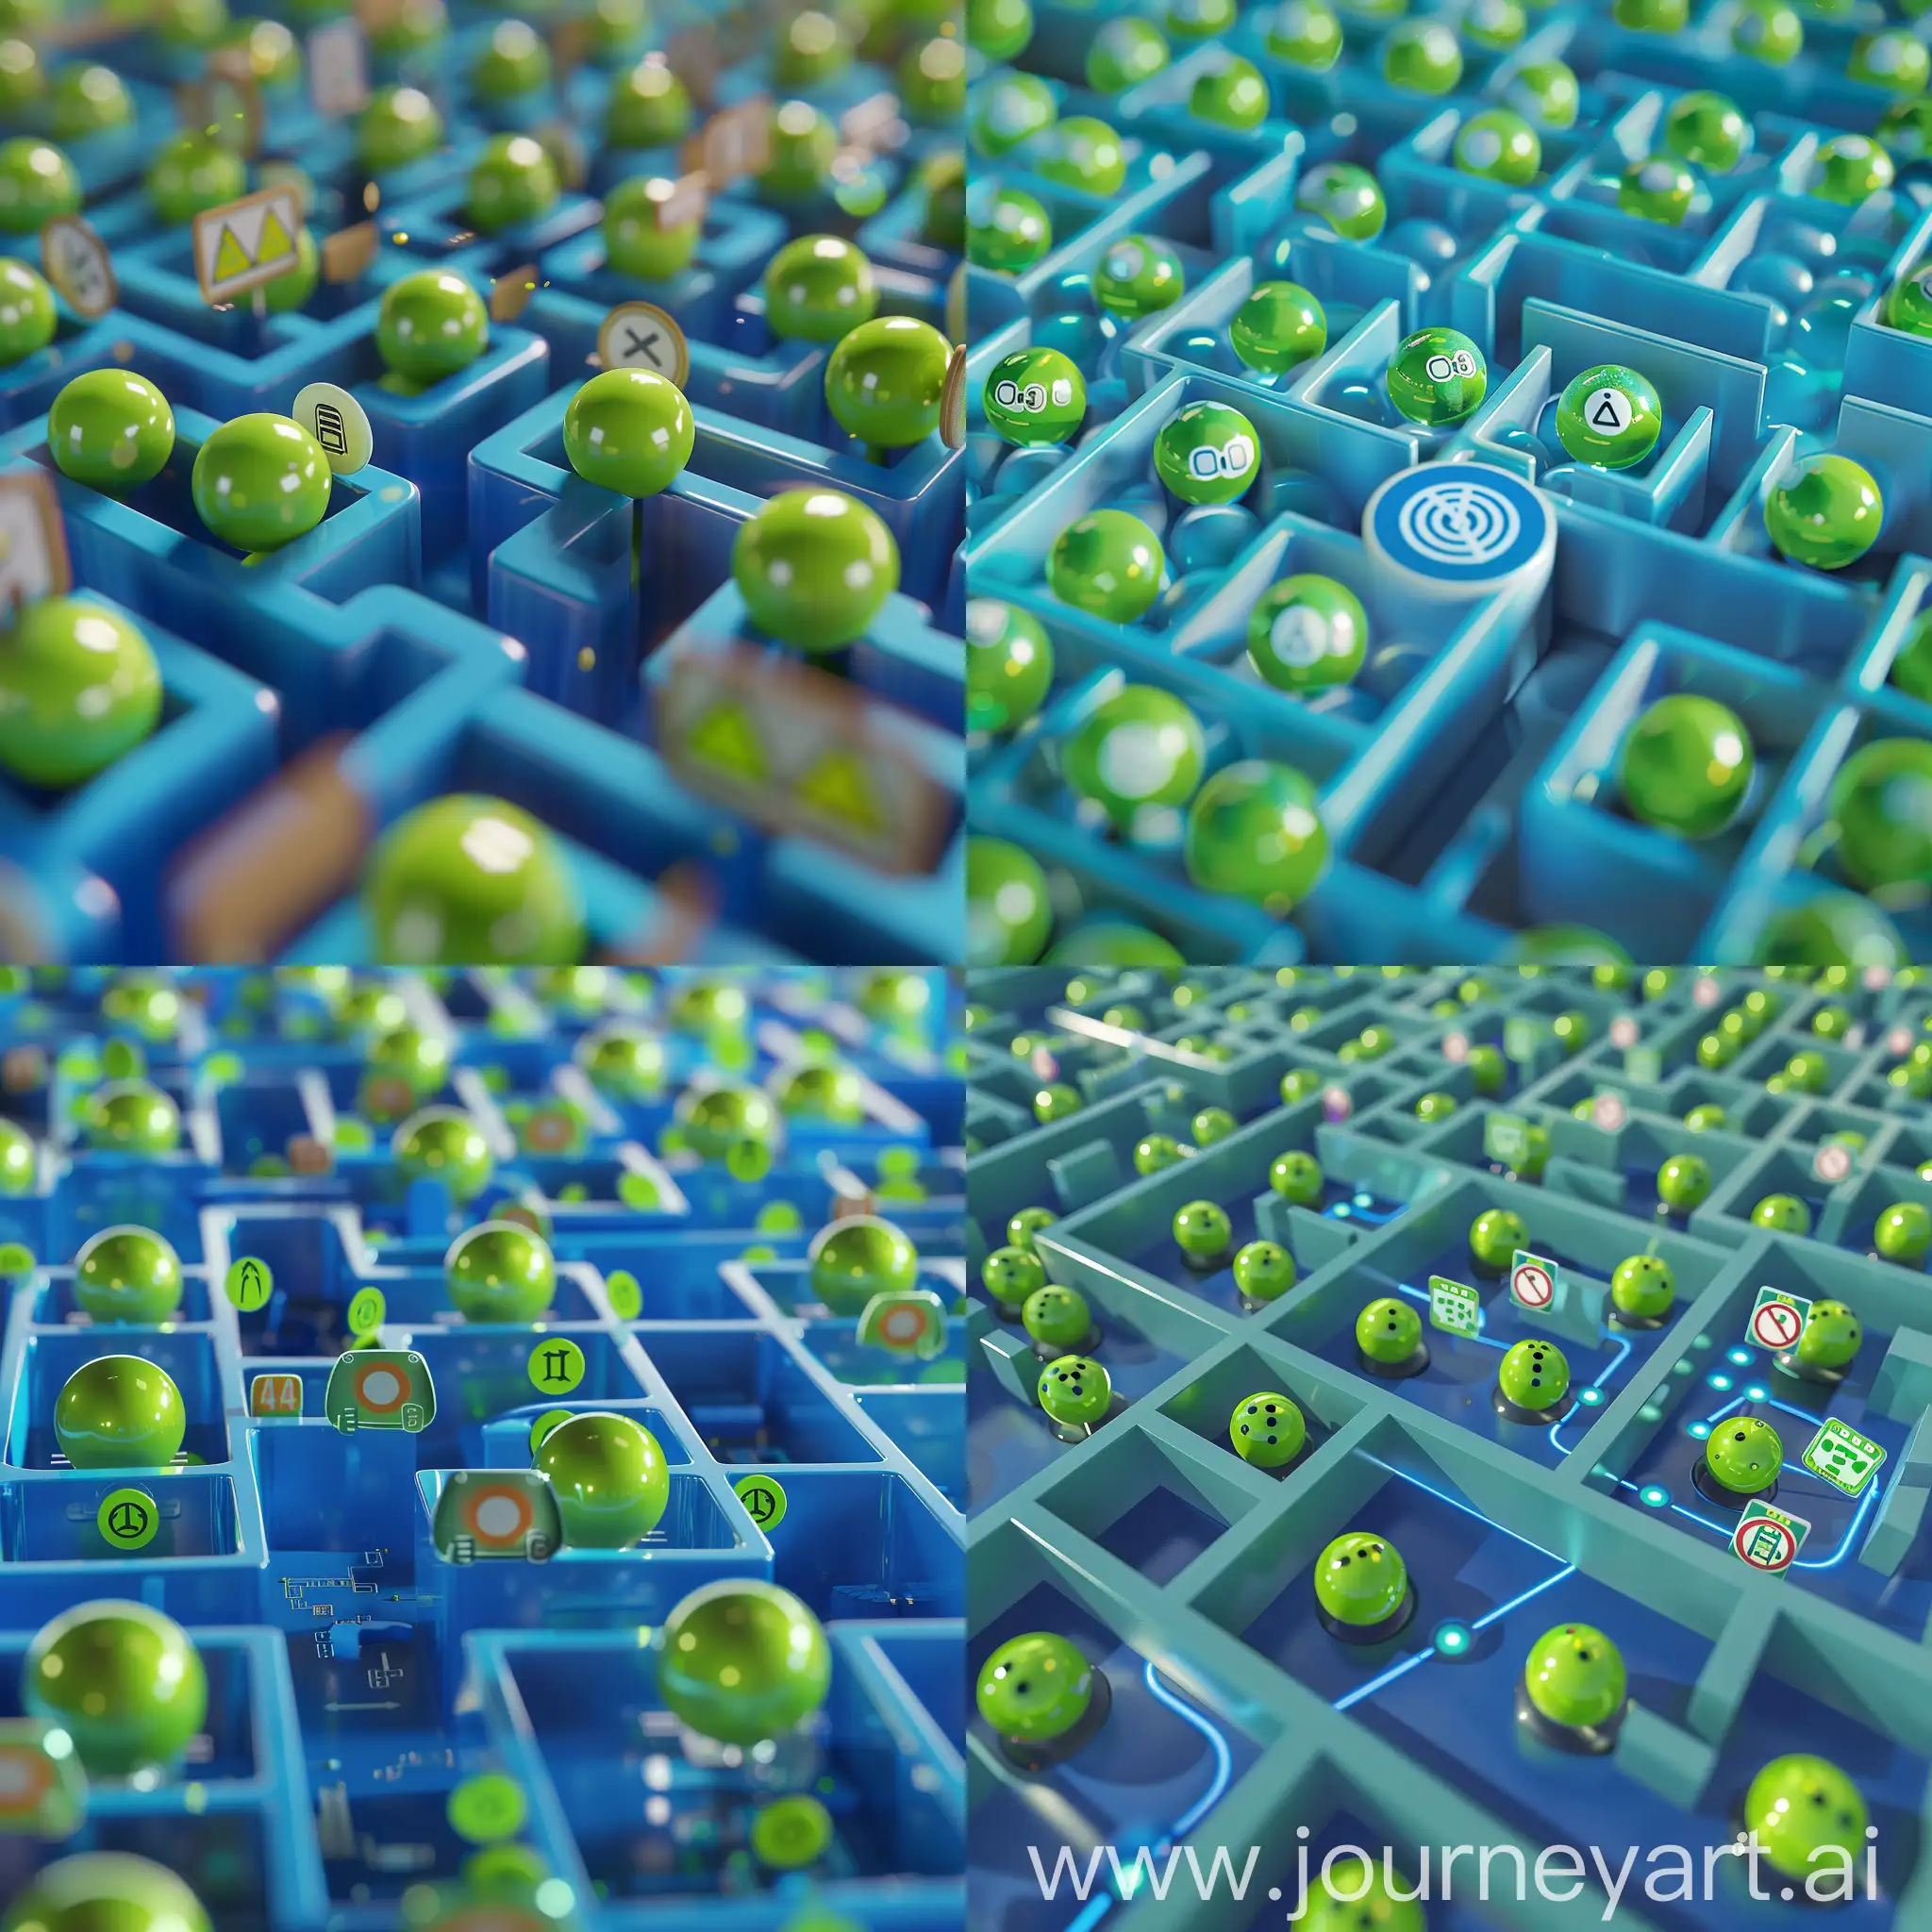 Organized-Green-Ball-Movement-in-a-Blue-Maze-with-Informative-Signs